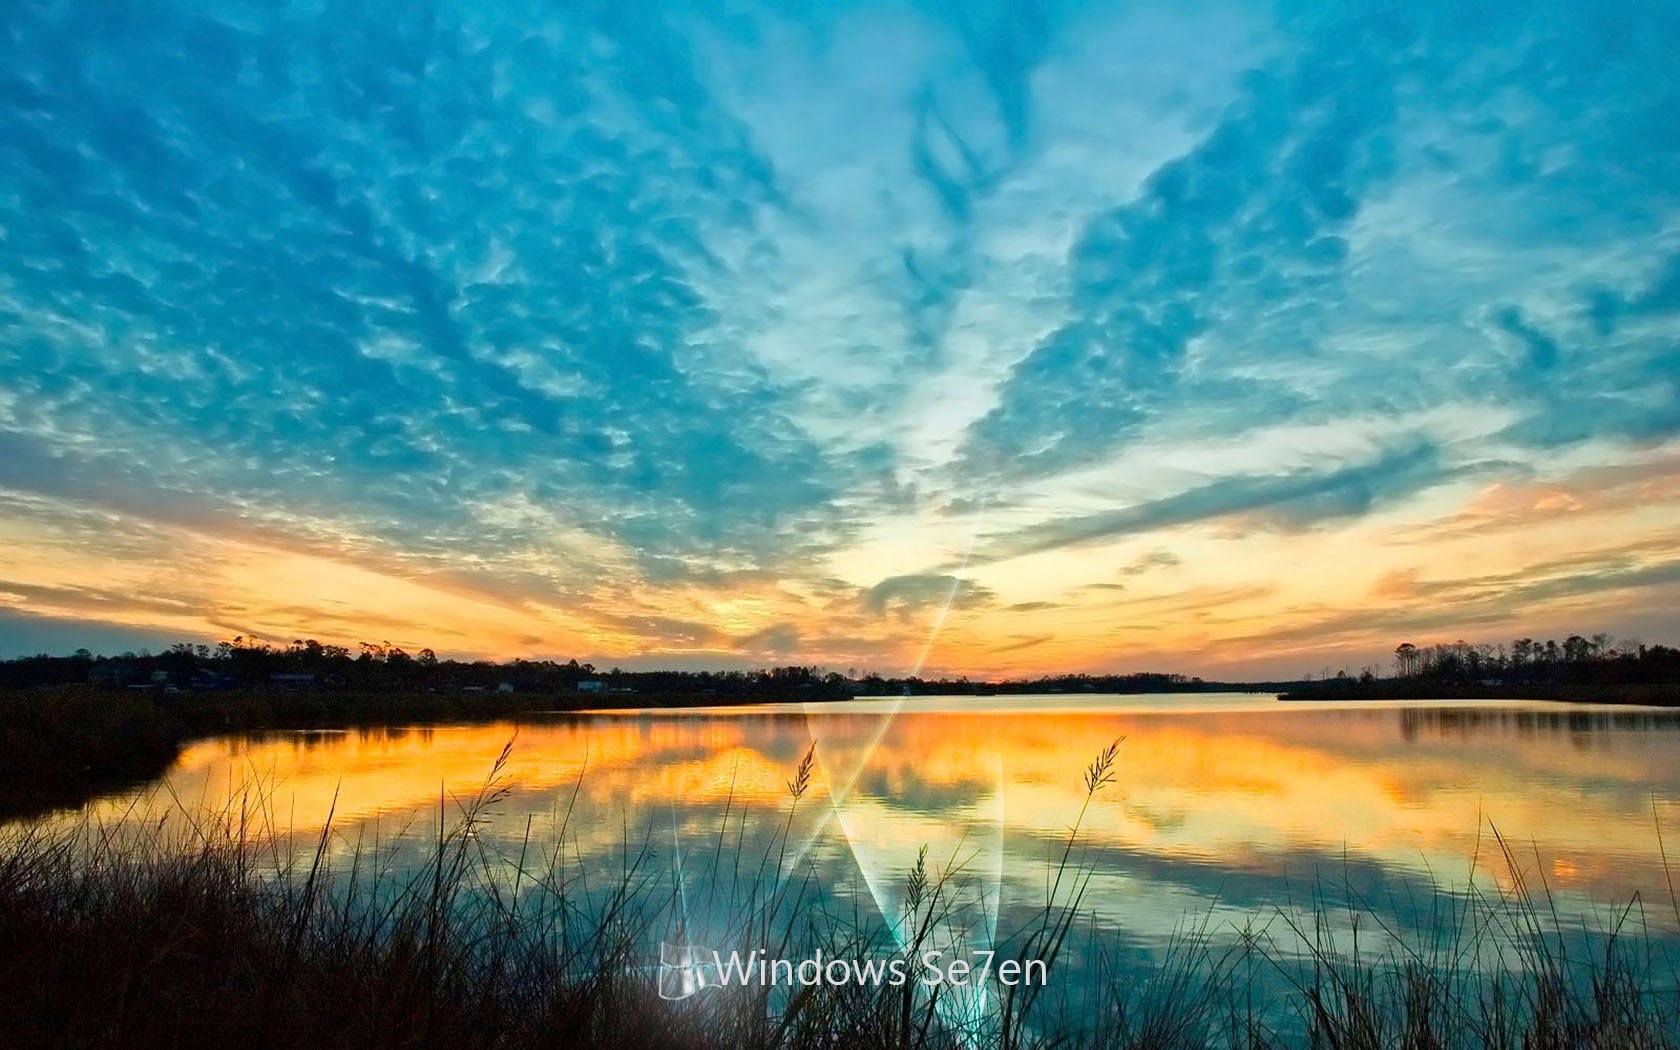 Hd Wallpapers for windows 7 Laptop Nature Widescreen Ultimate free